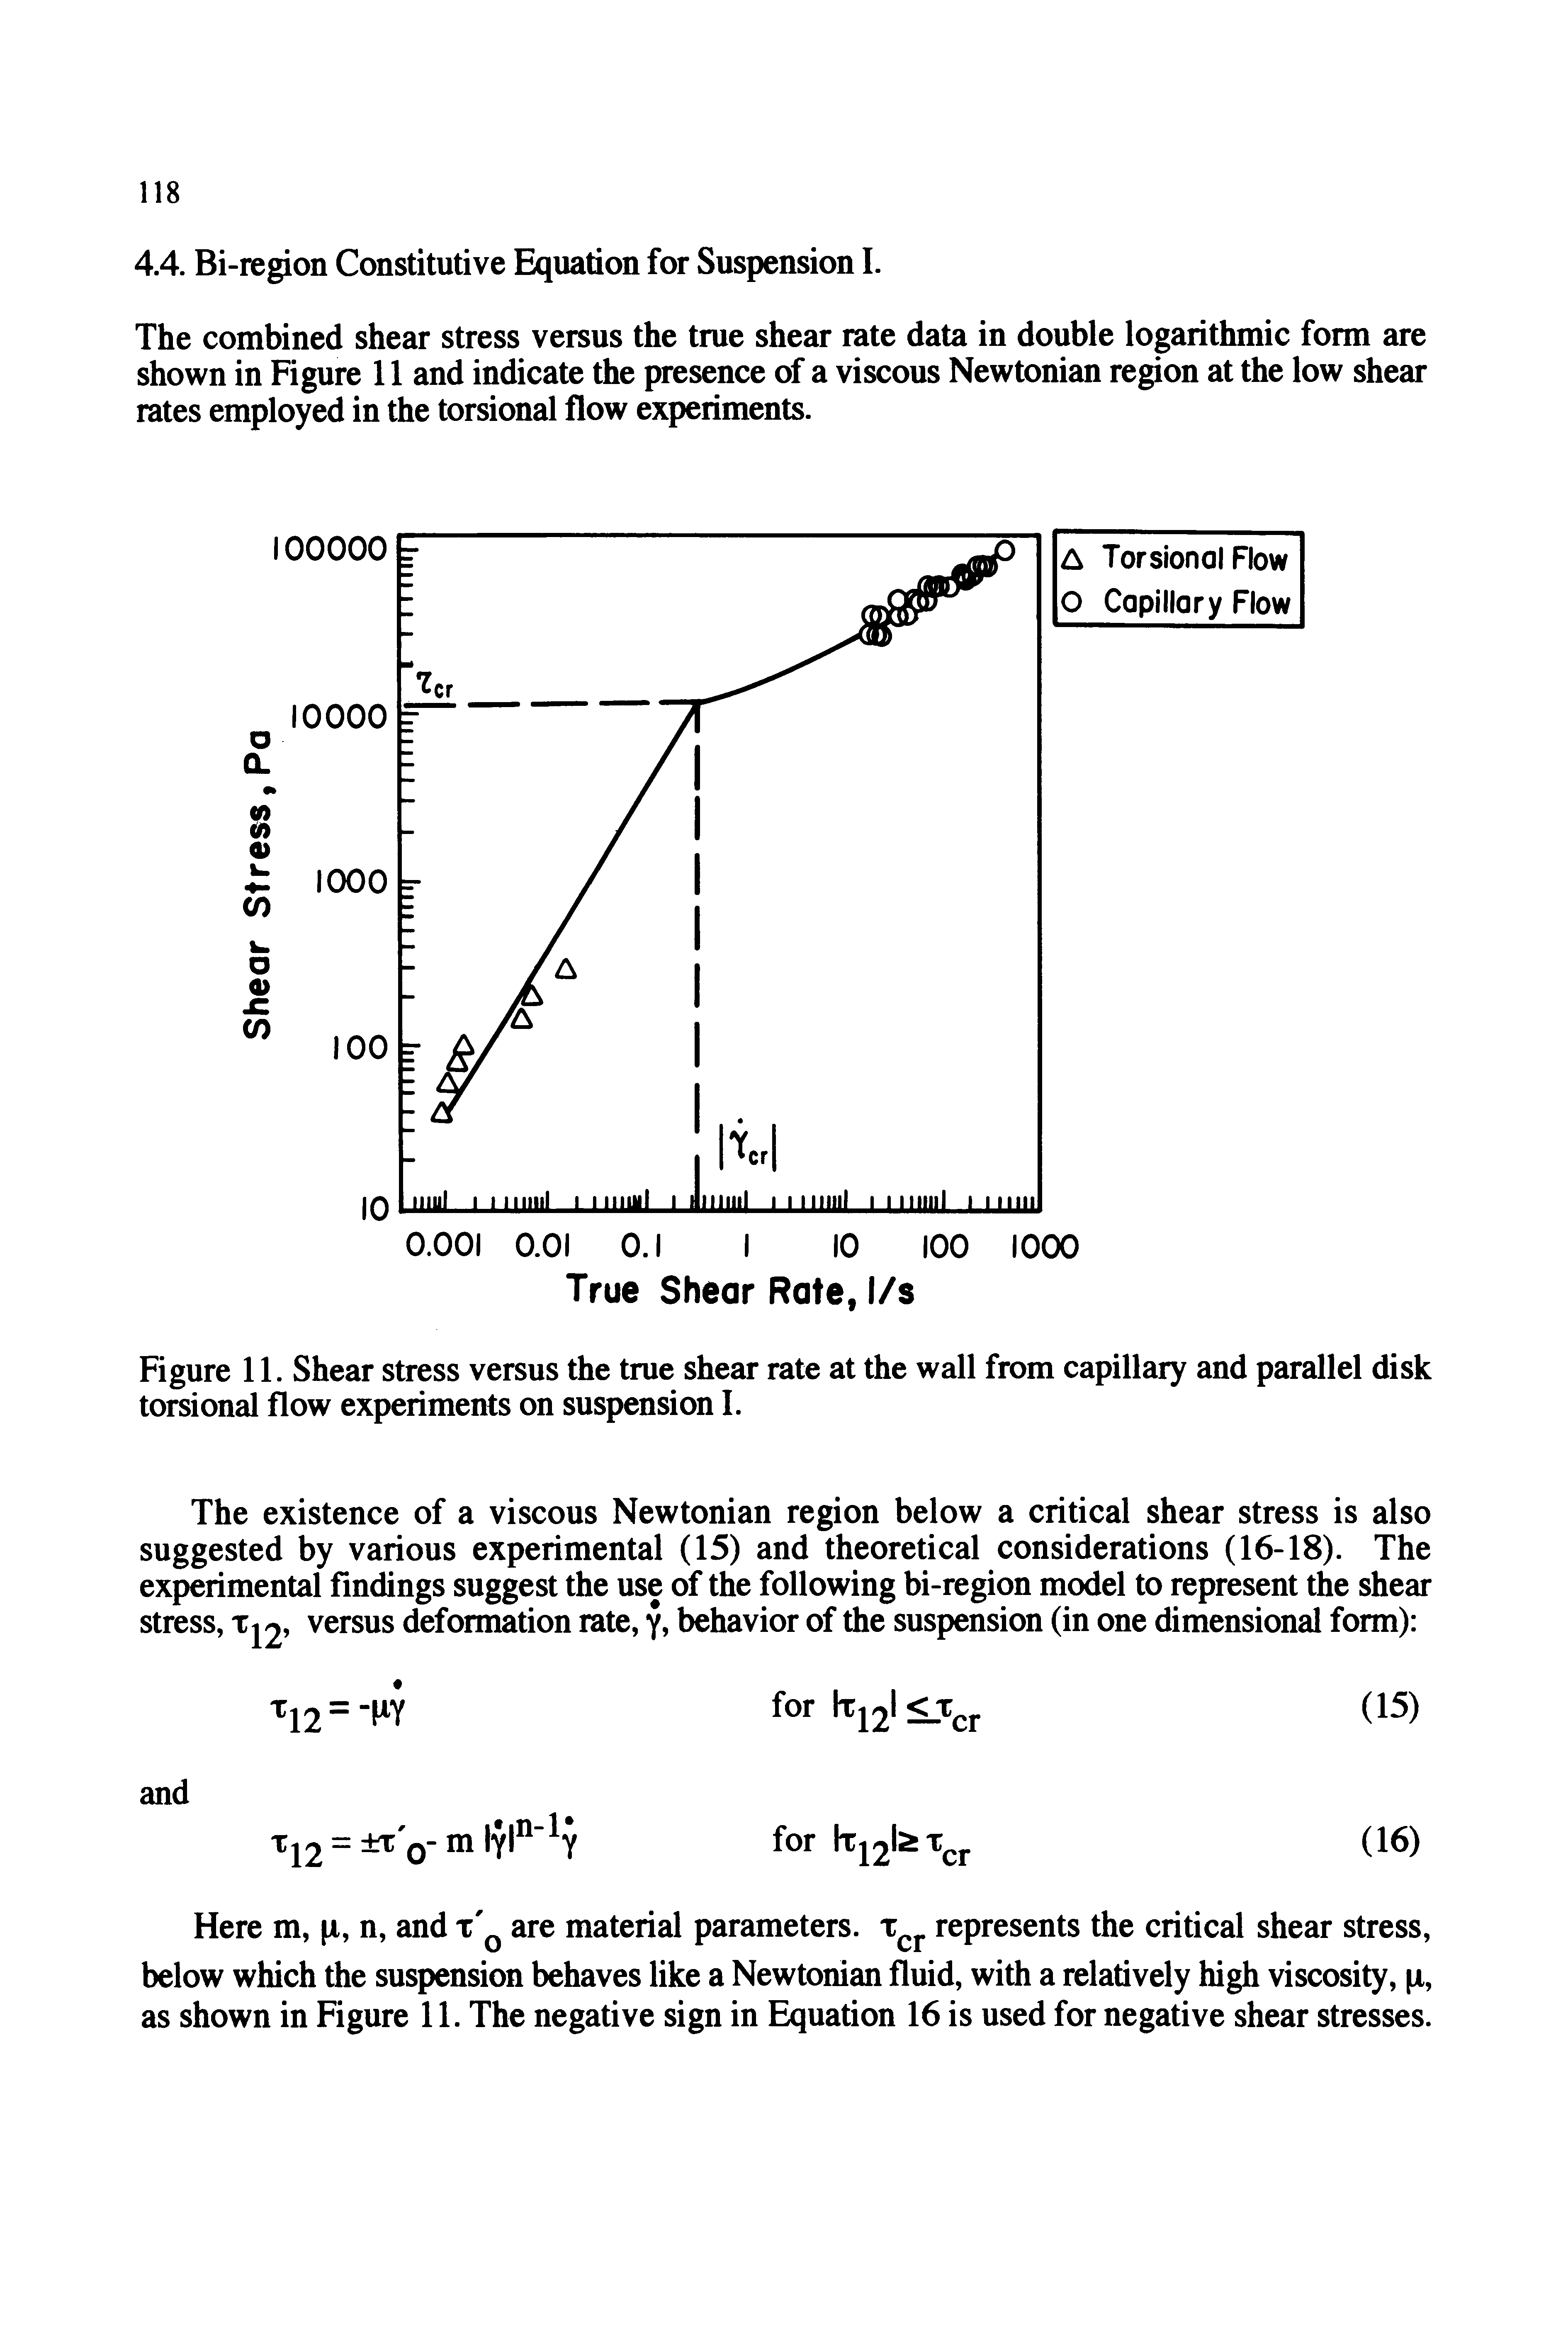 Figure 11. Shear stress versus the true shear rate at the wall from capillary and parallel disk torsional flow experiments on suspension 1.